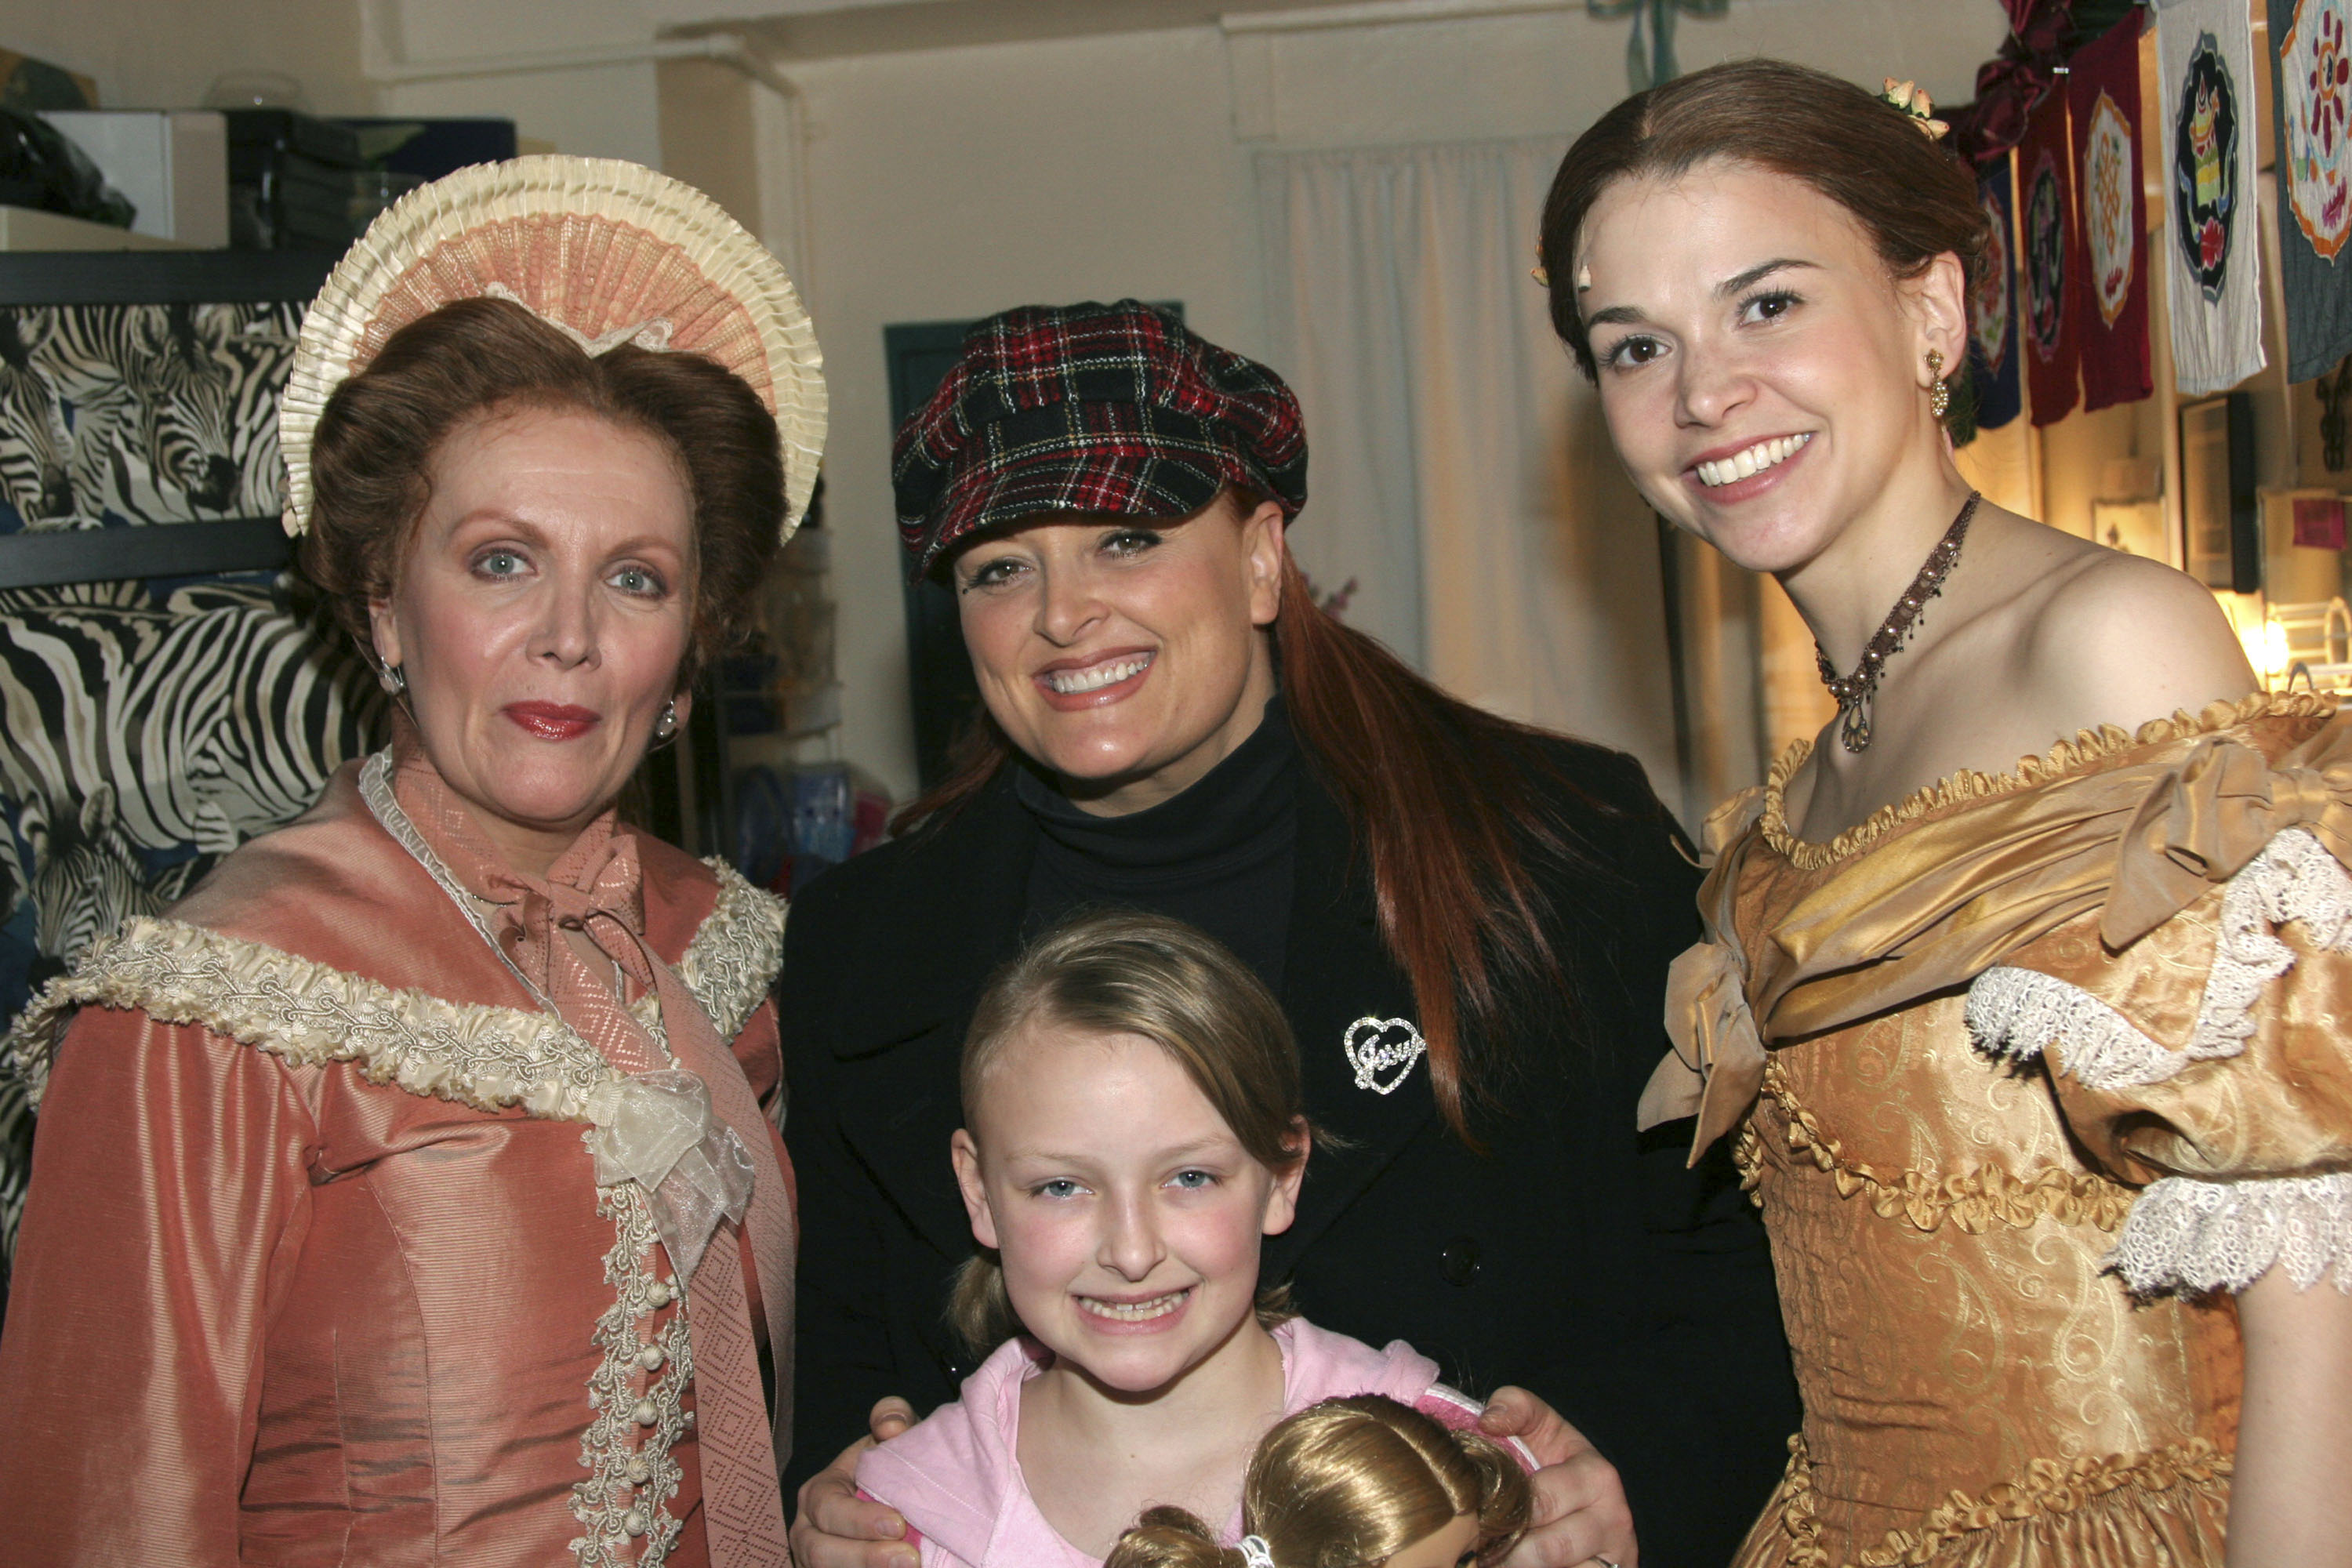 Wynonna Judd with her daughter, Grace Kelley and friends on March 23, 2005 | Source: Getty Images